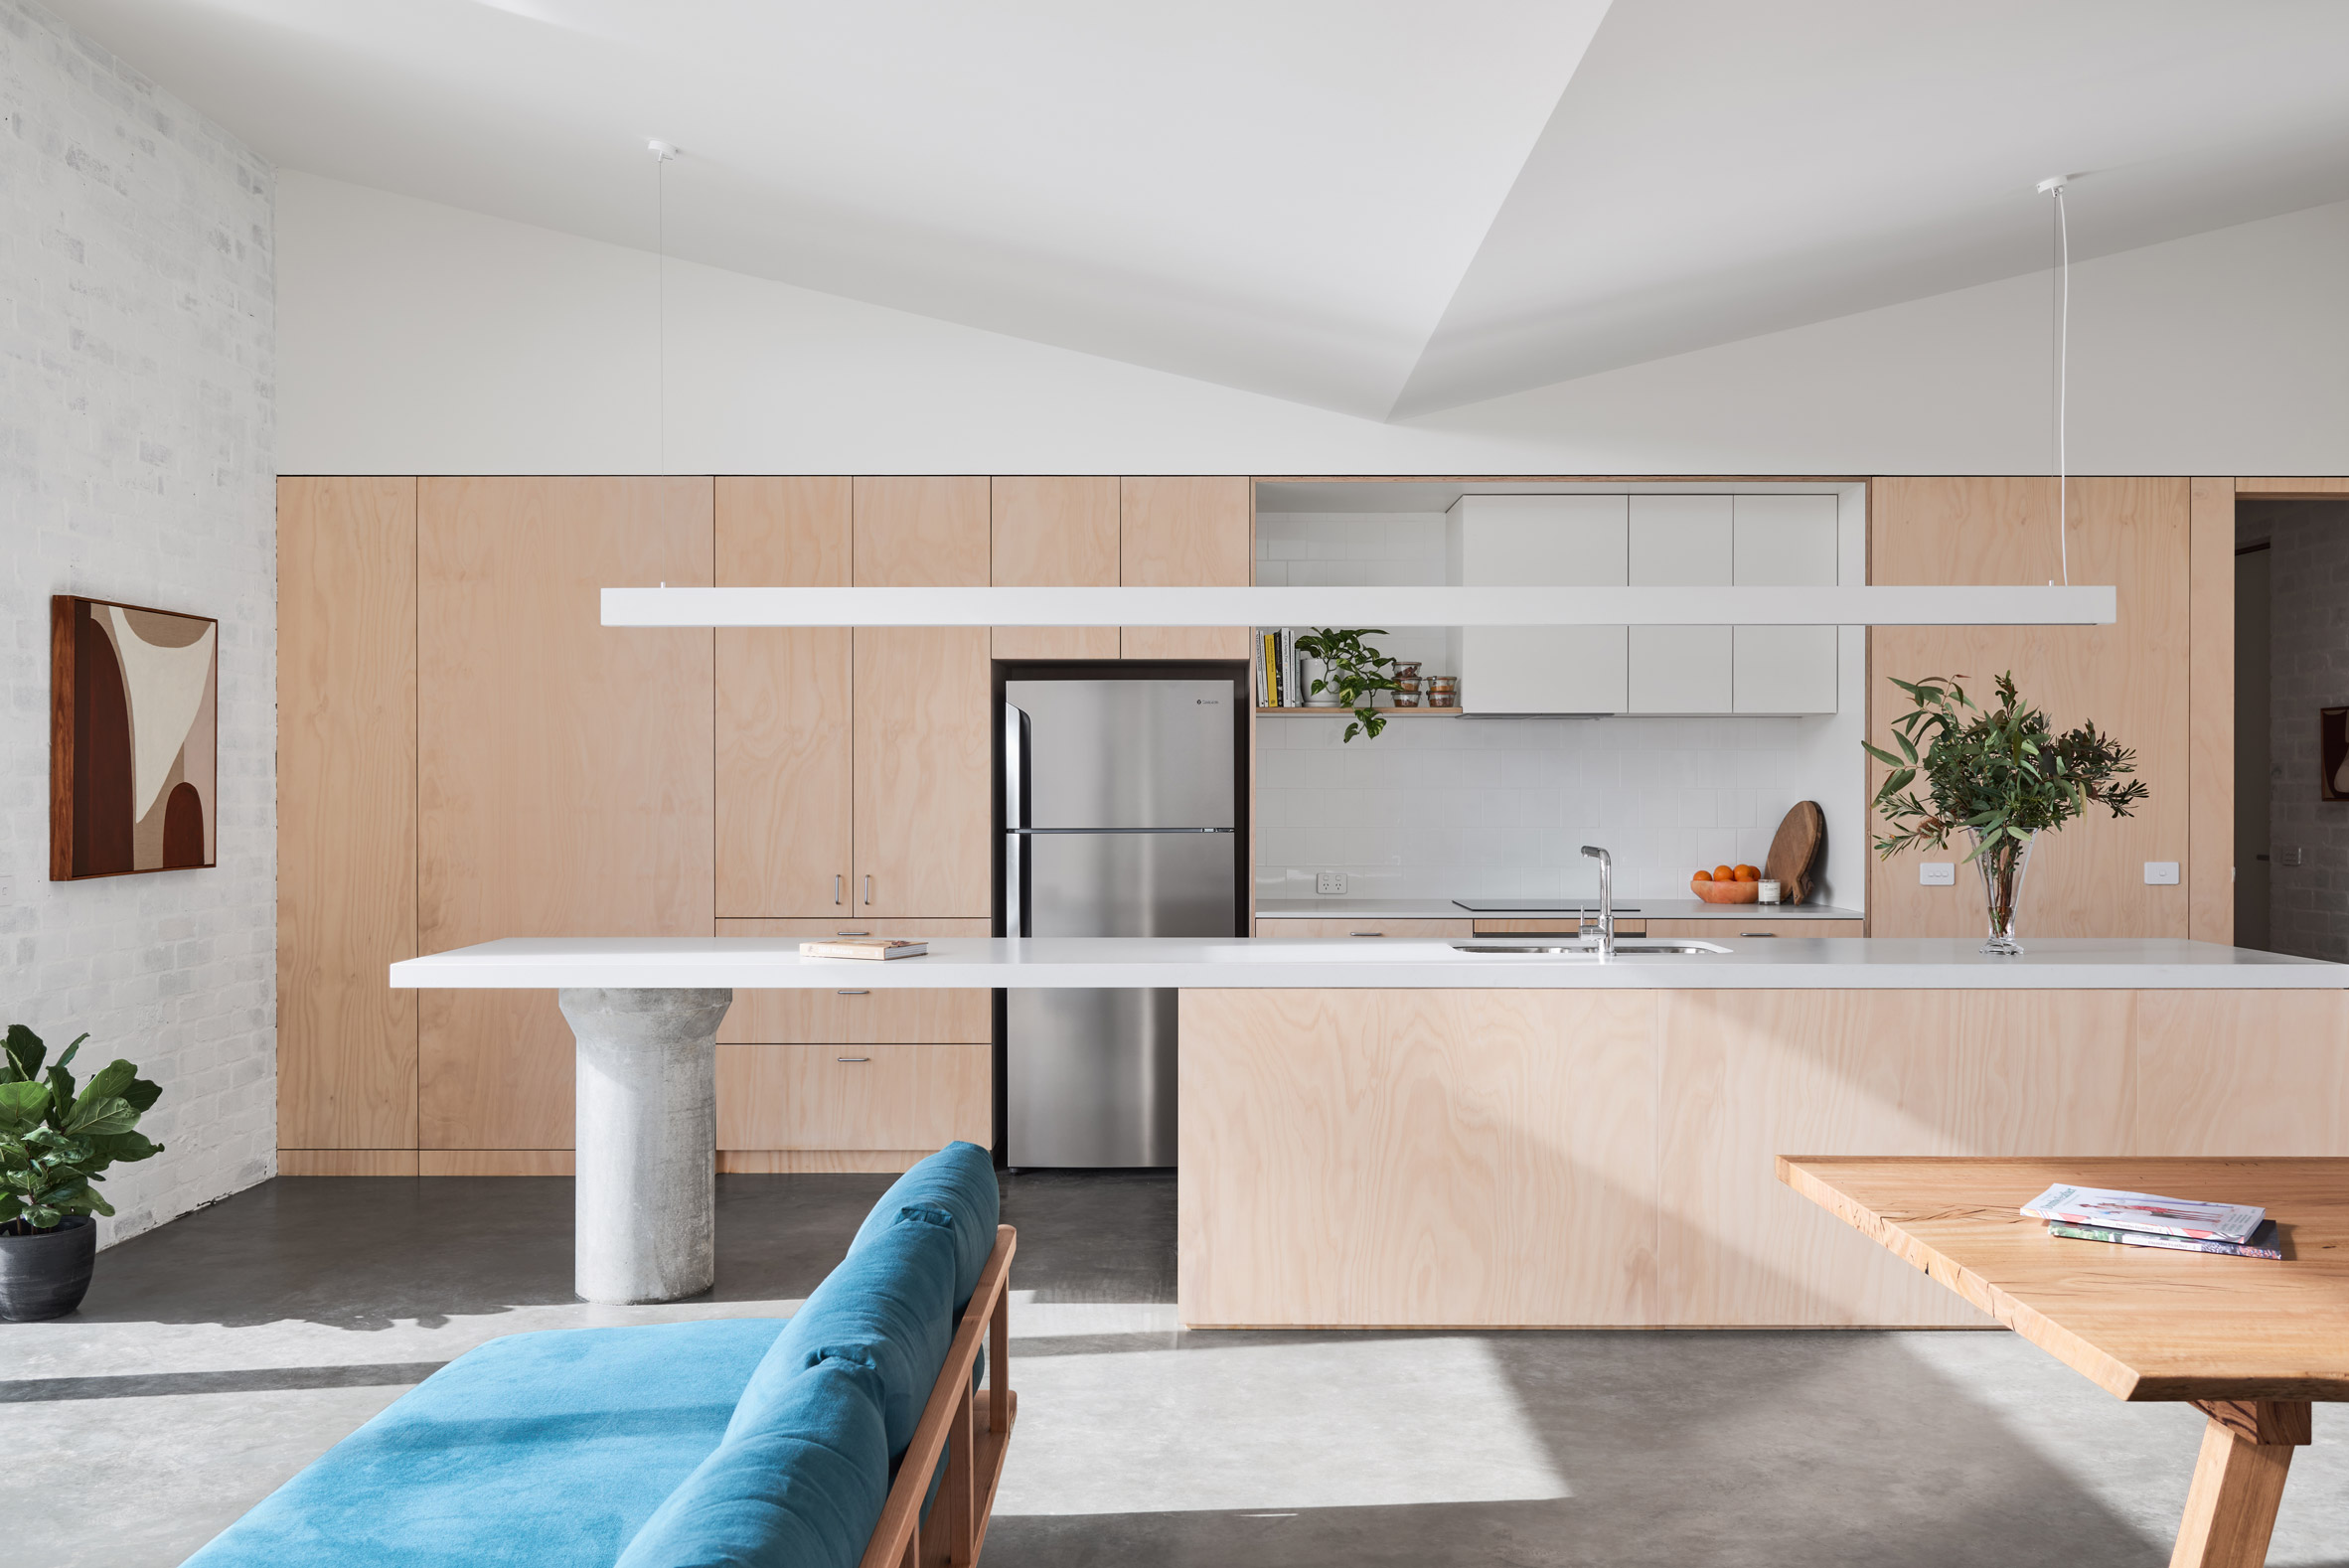 Clare Cousins Architects create first carbon positive home in Victoria, Australia